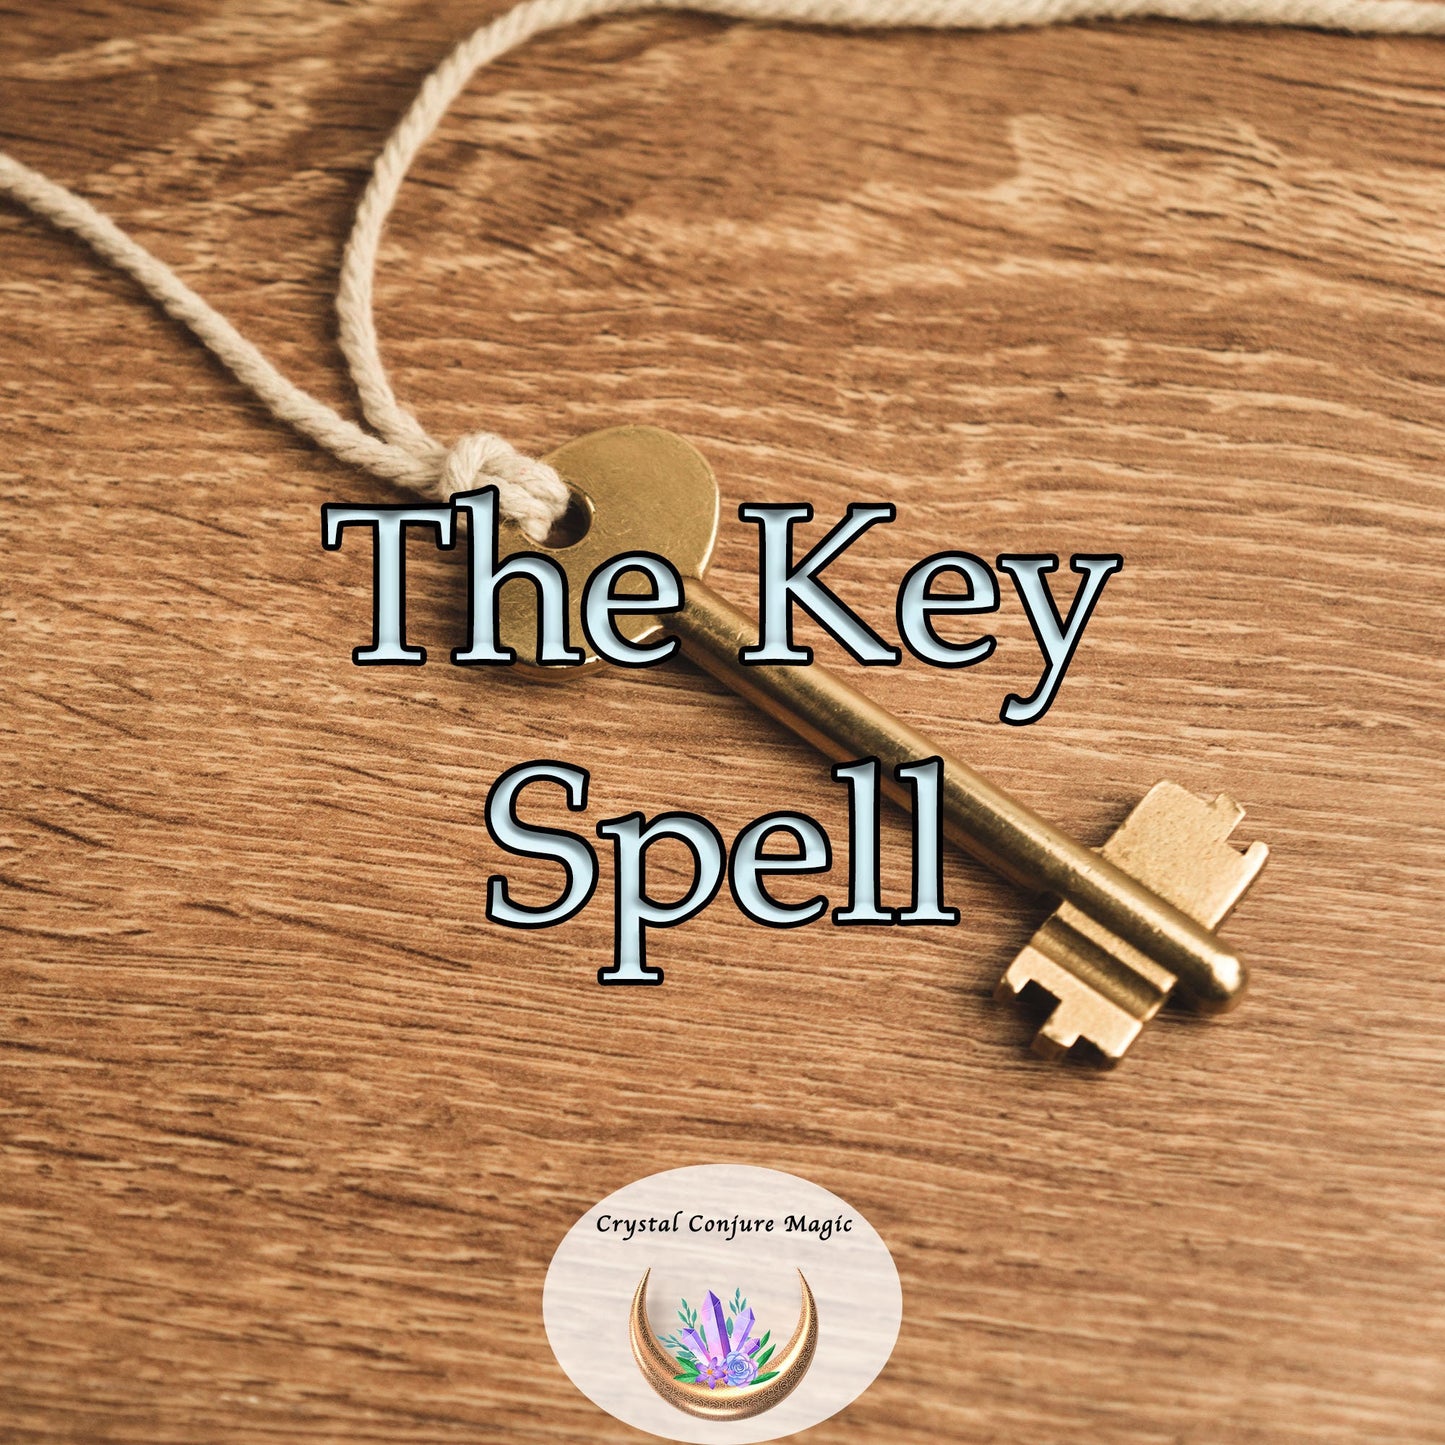 The Key Spell - open the locks that bind you and free your spirit to soar to the heights of your wildest dreams